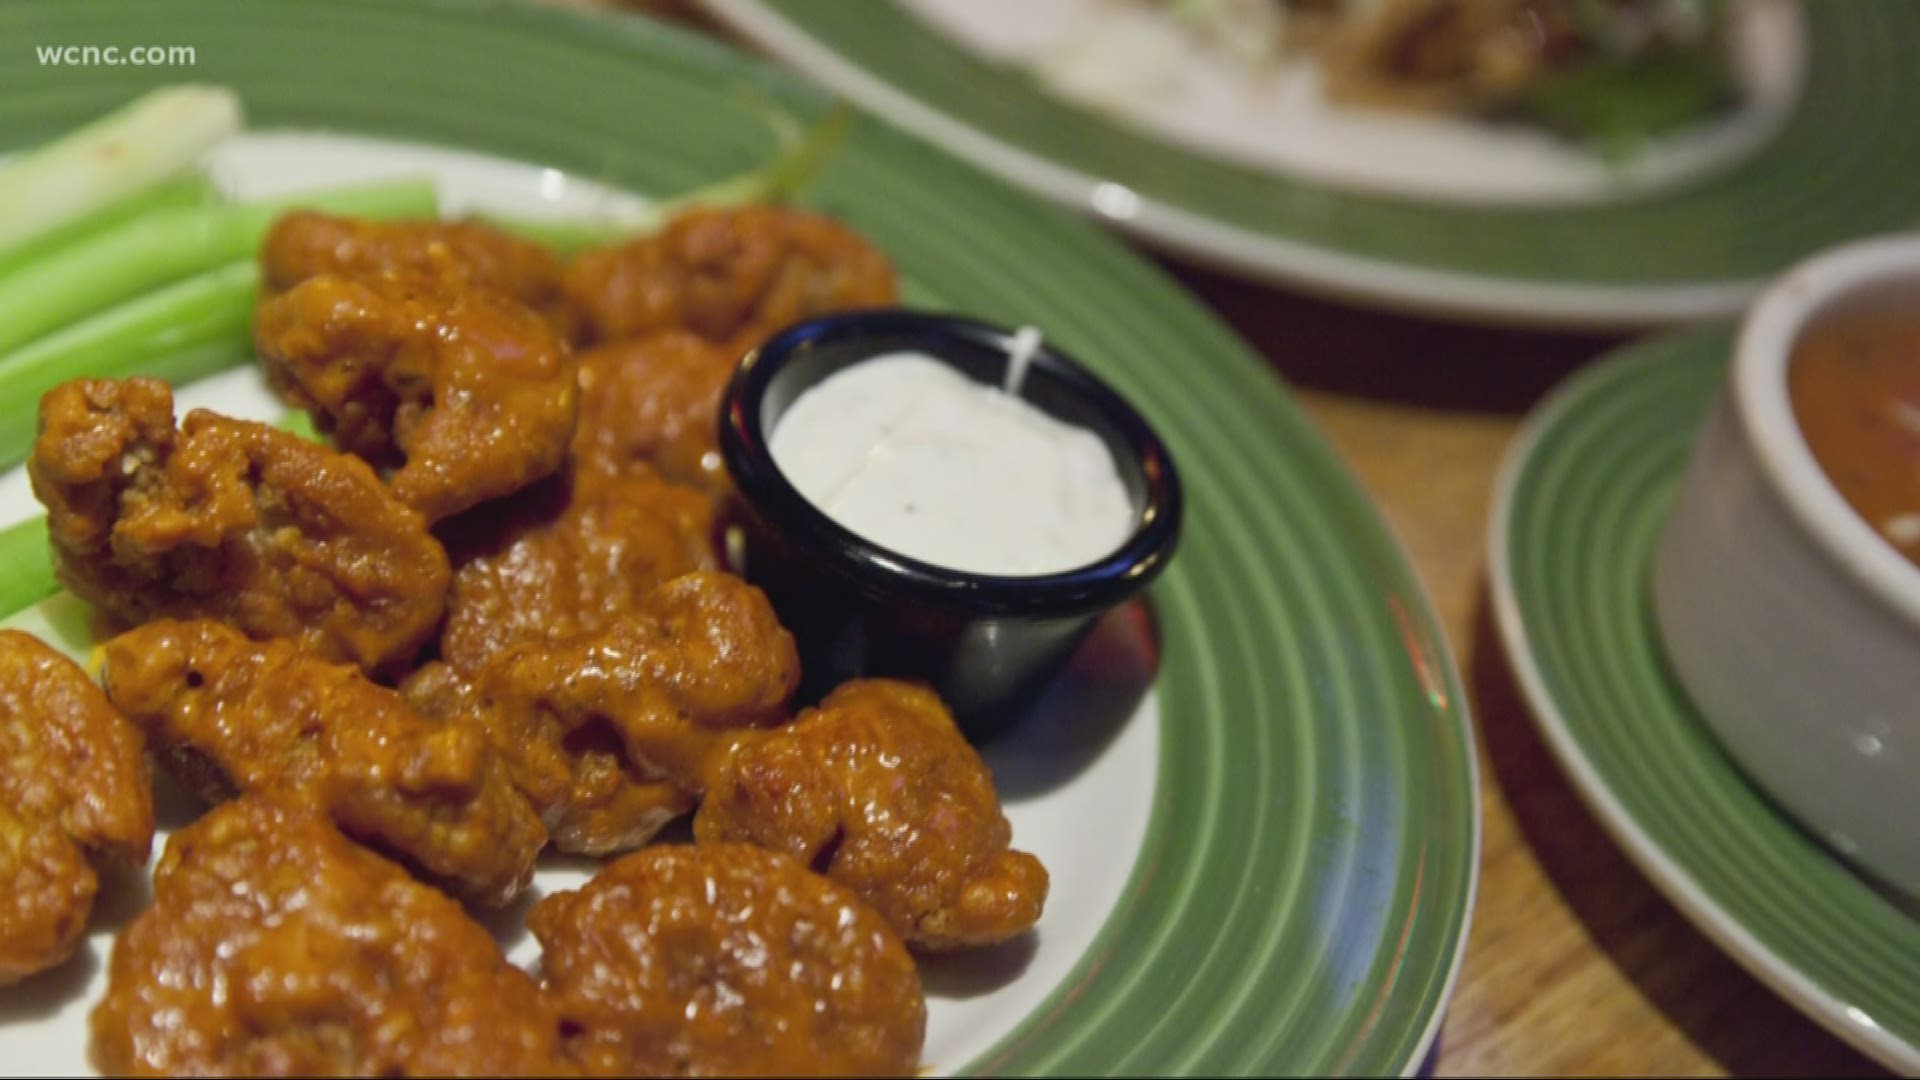 It's the great debate of 2020. Should boneless chicken wings be called wings? A new study found that Americans are as divided on the subject as ever.